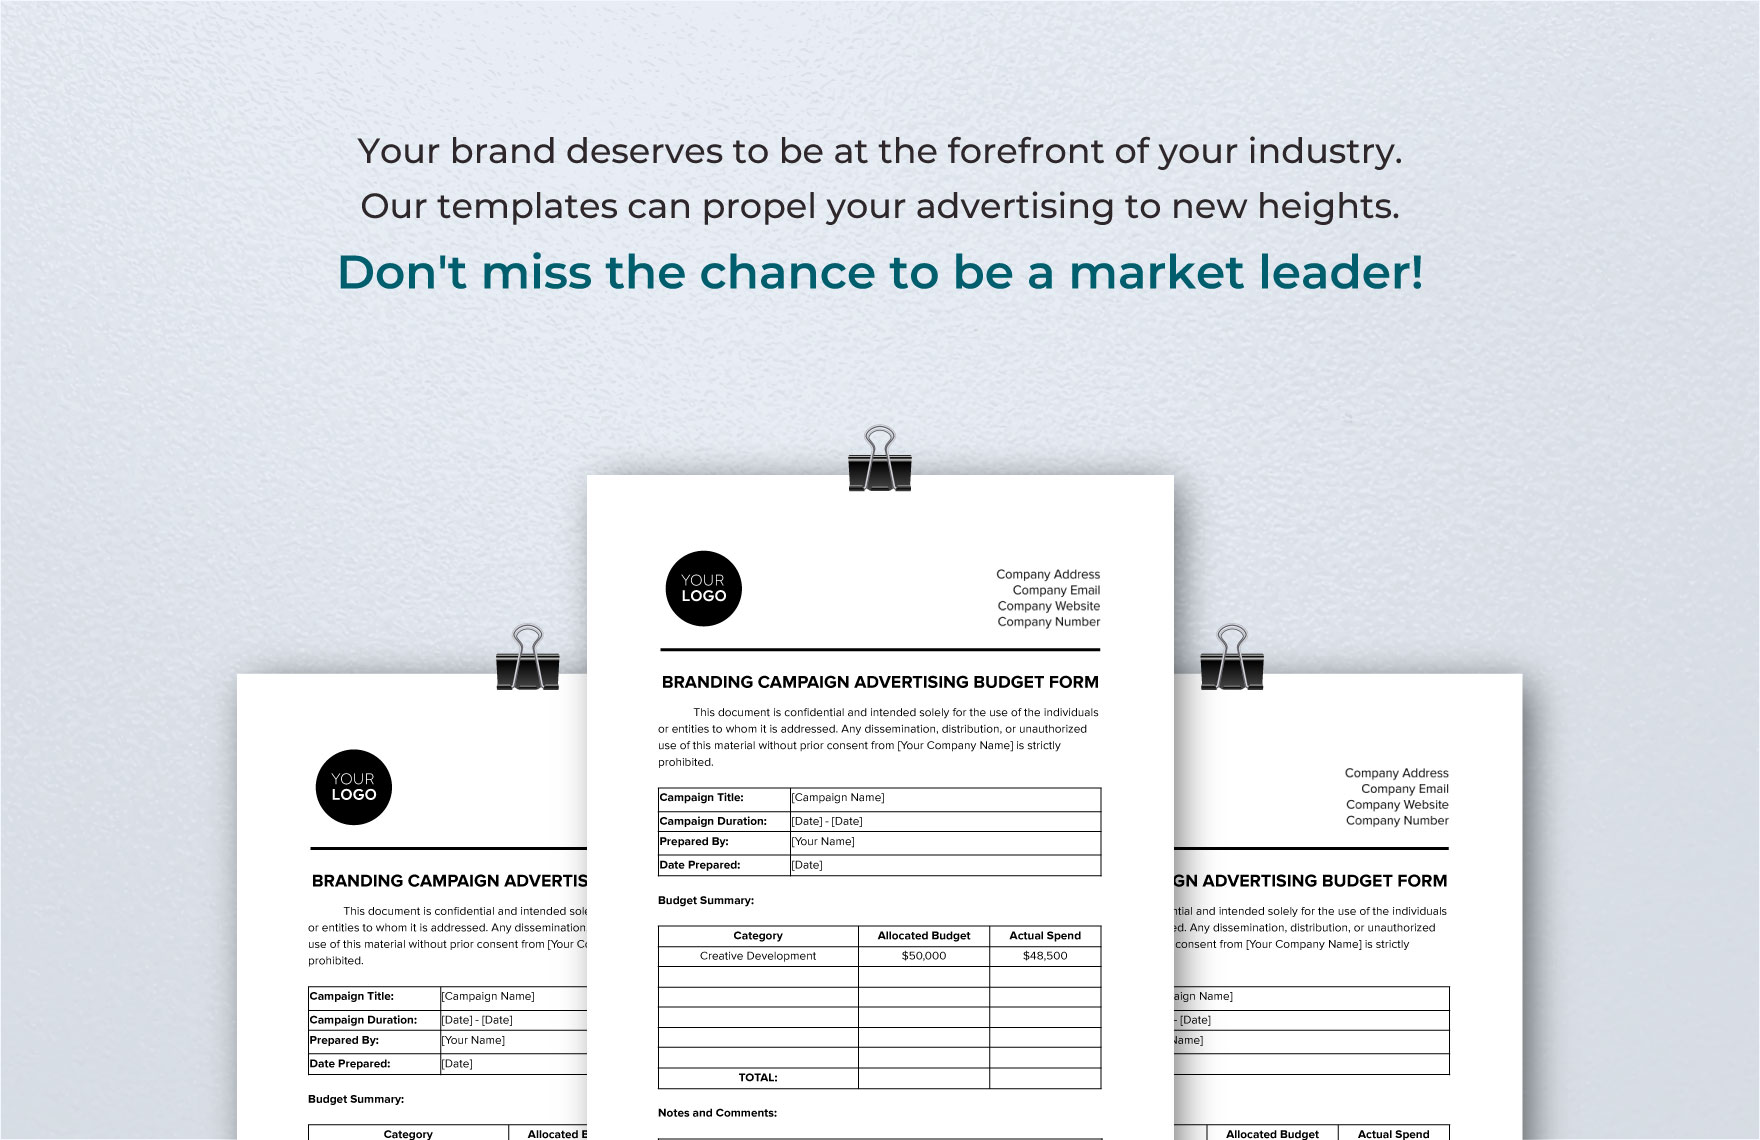 Branding Campaign Advertising Budget Form Template